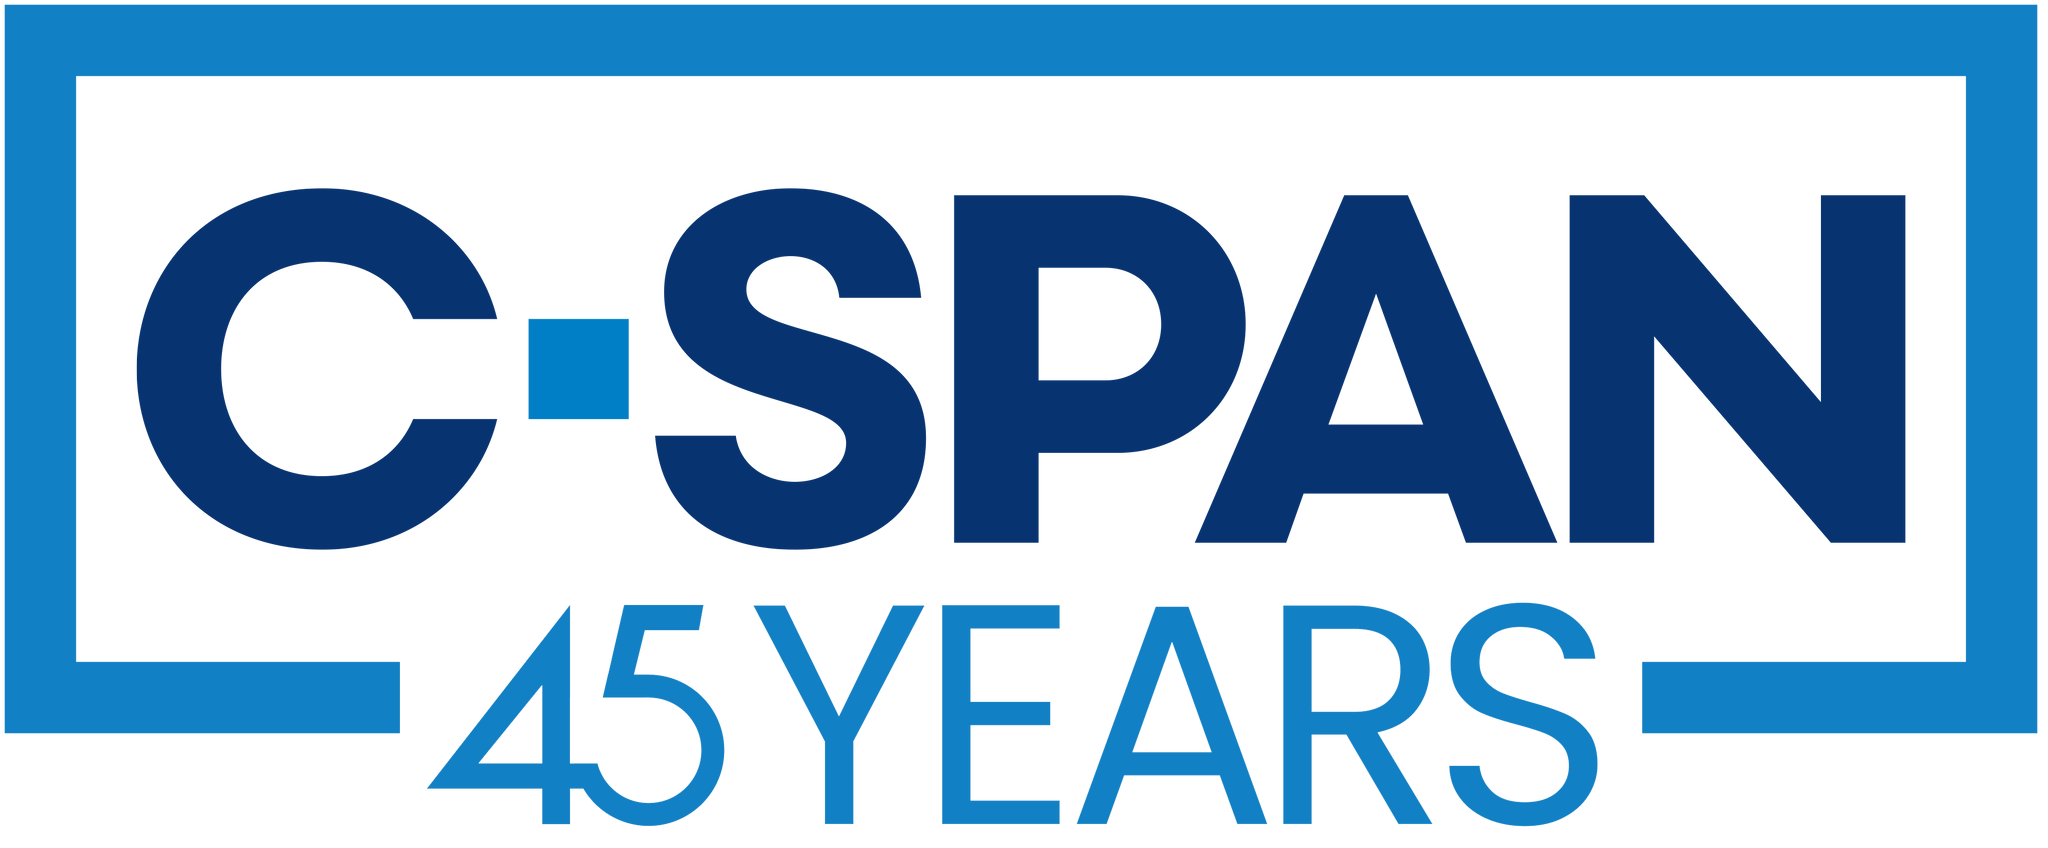 National Cable Satellite Corporation (C-SPAN) logo